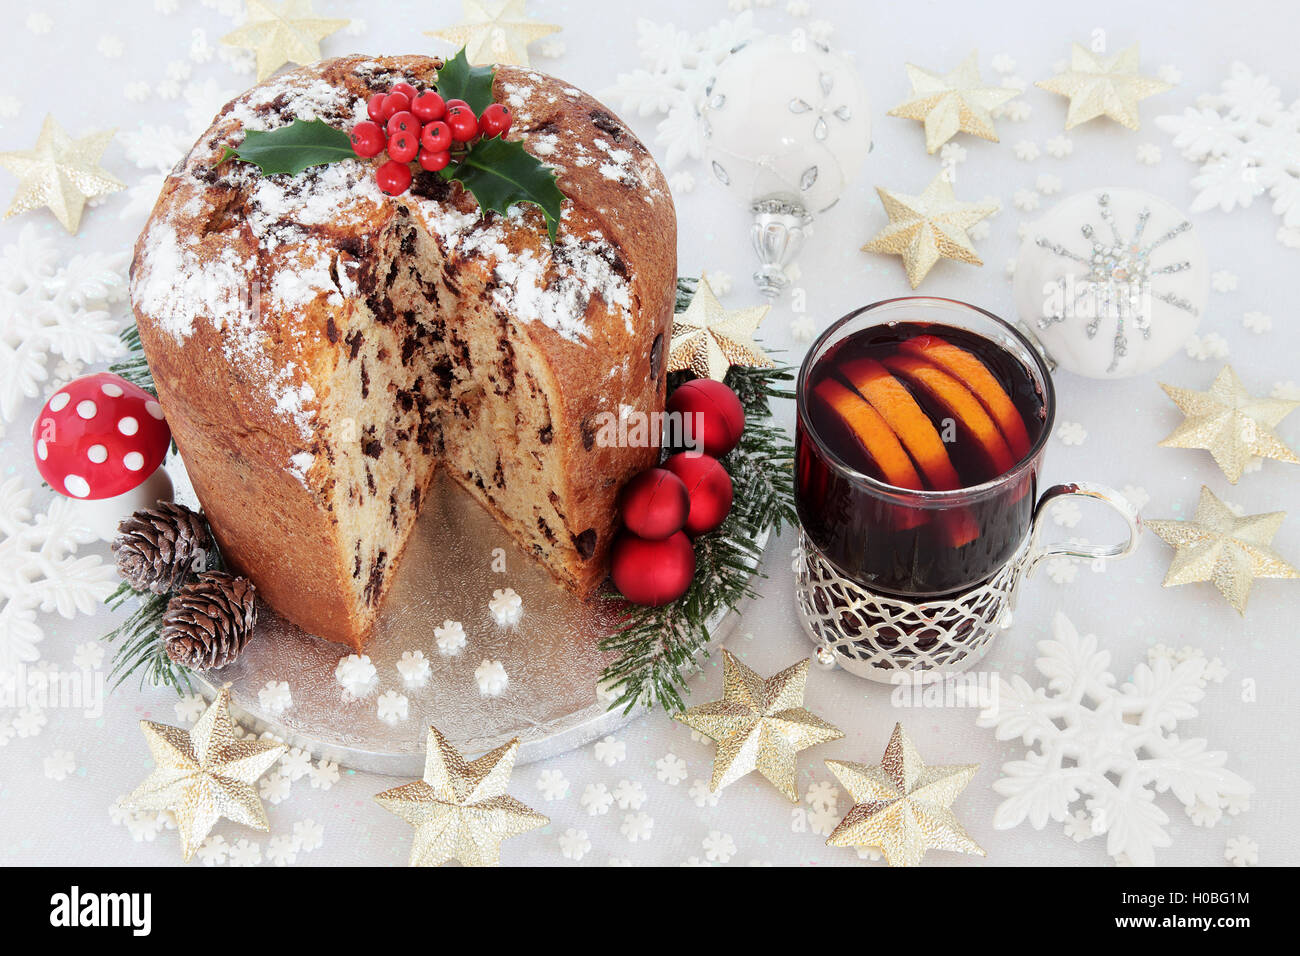 Chocolate panettone christmas cake with mulled wine and star,snowflake and round shaped bauble decorations. Stock Photo